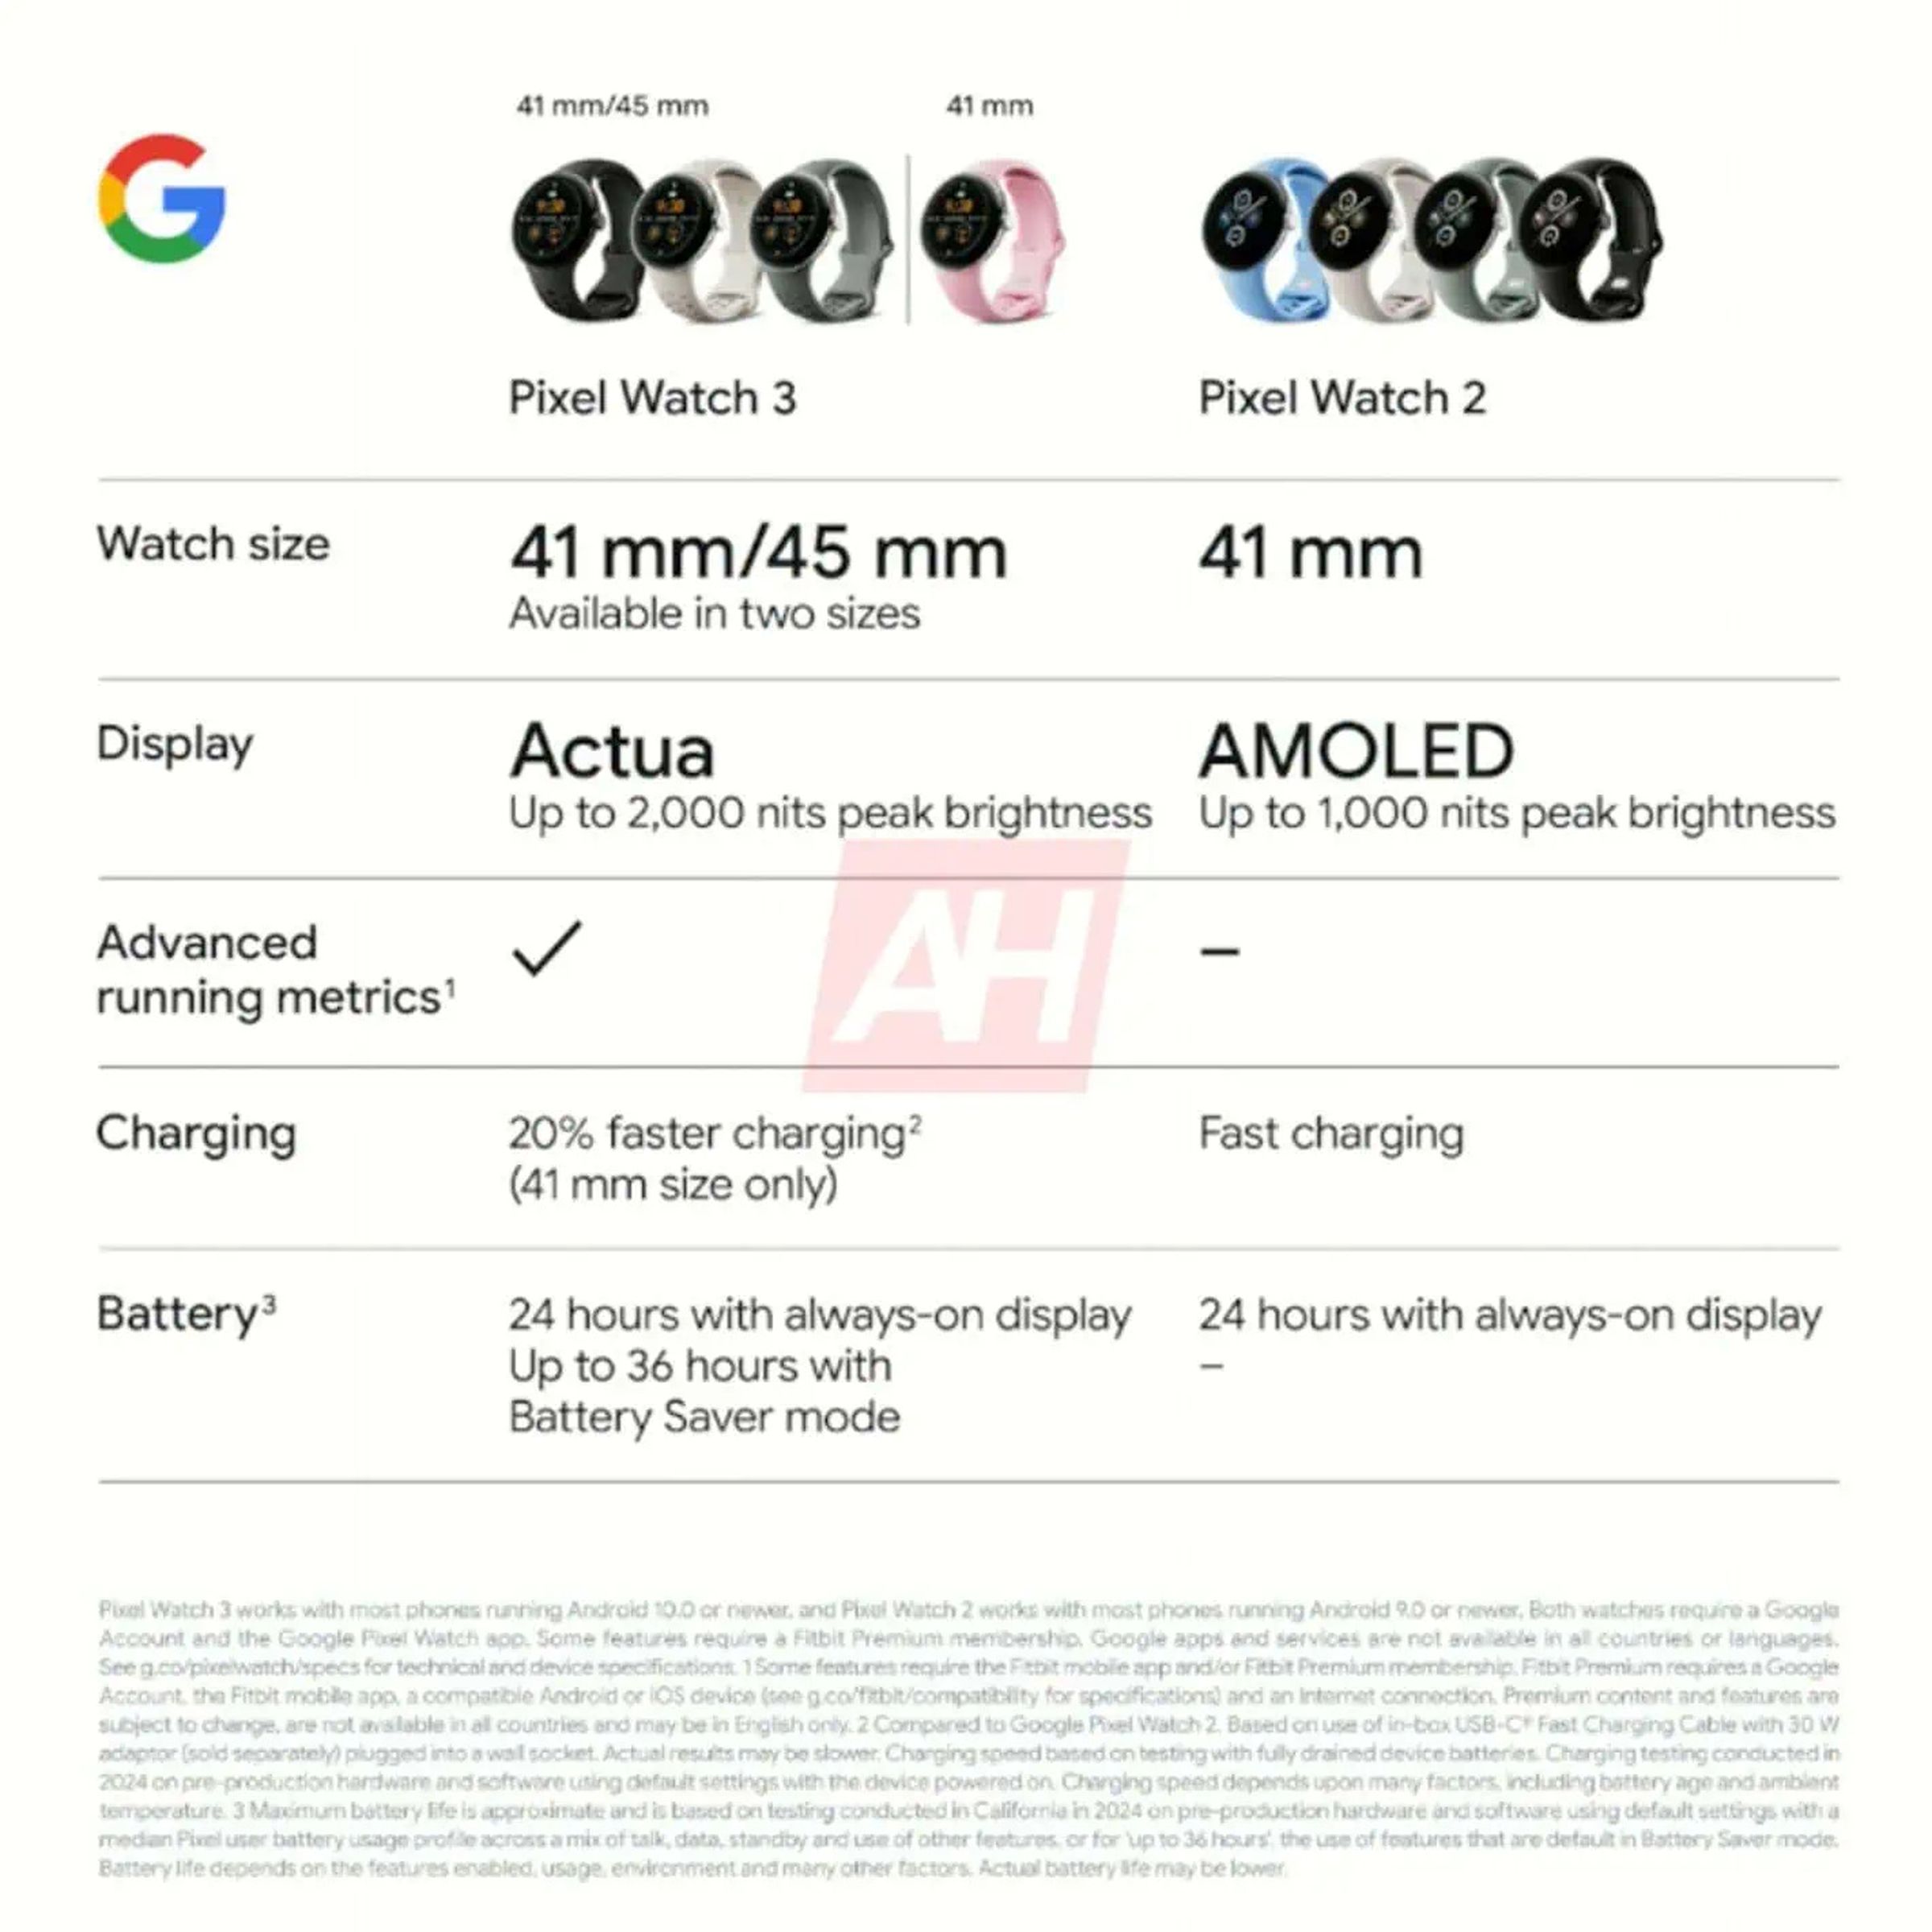 A leaked specs sheet purporting to show the details of the Pixel Watch 3 compared to the Pixel Watch 2